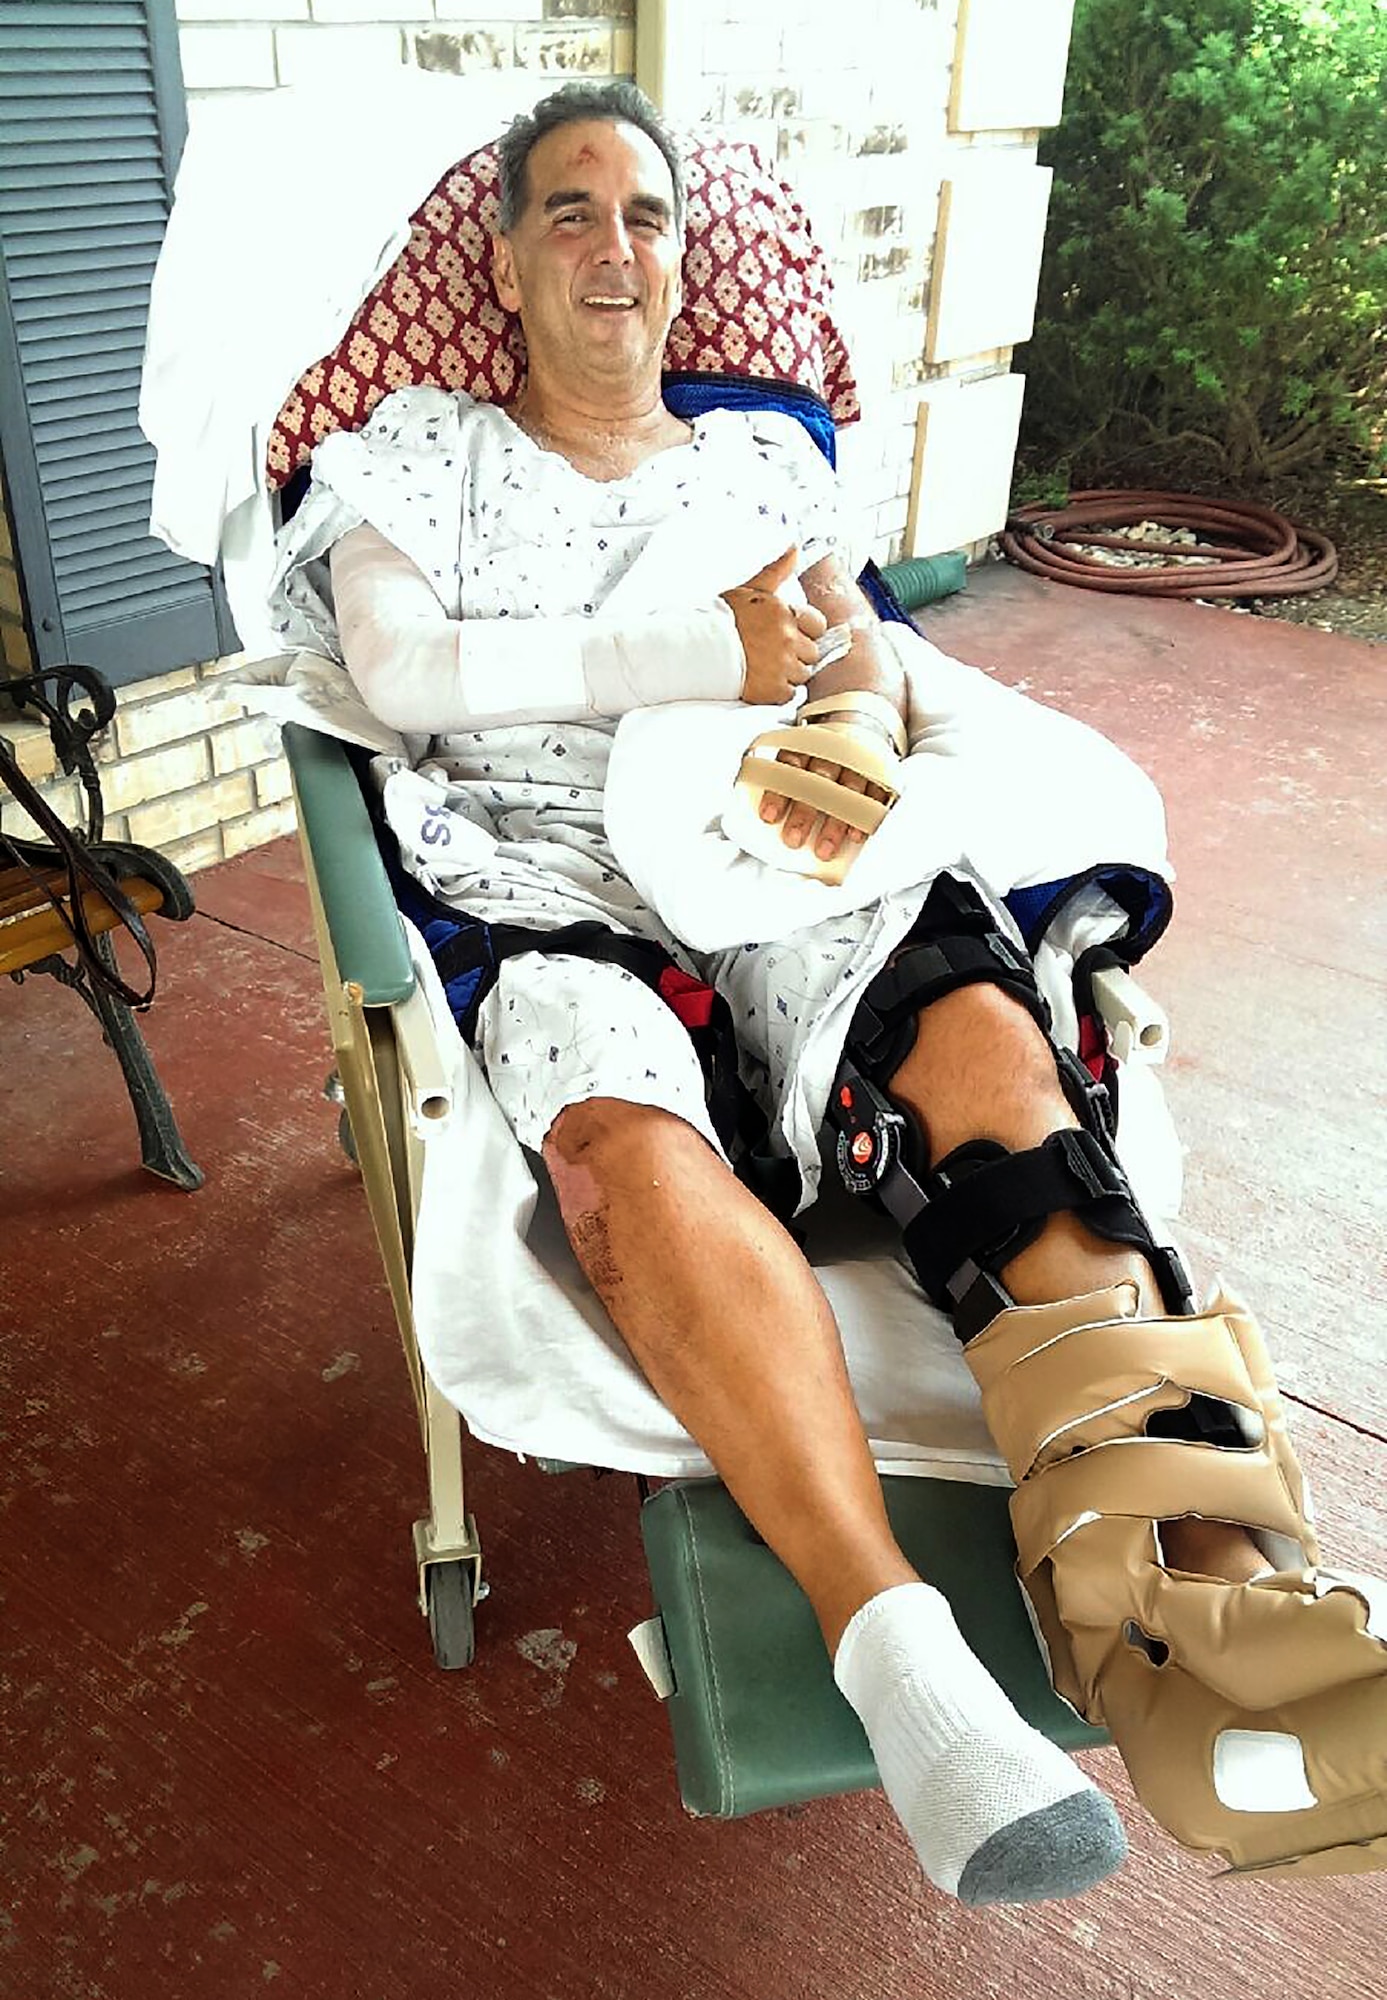 Albert Garcia, 47th Operations Support Squadron radar approach controller and retired master sergeant, poses for a photo at Westover Hills Rehabilitation and Healthcare Center in San Antonio, Texas, Aug. 17, 2015.  Garcia was the victim of a hit-and-run on State Road 277 North, and suffered breaks to multiple bones including his pelvis into two pieces; his upper left leg; his lower left leg; his left arm in three places, cutting to the bone; both wrists; his spine and multiple cuts and scrapes. (Photo provided by the Garcia family)(Released)